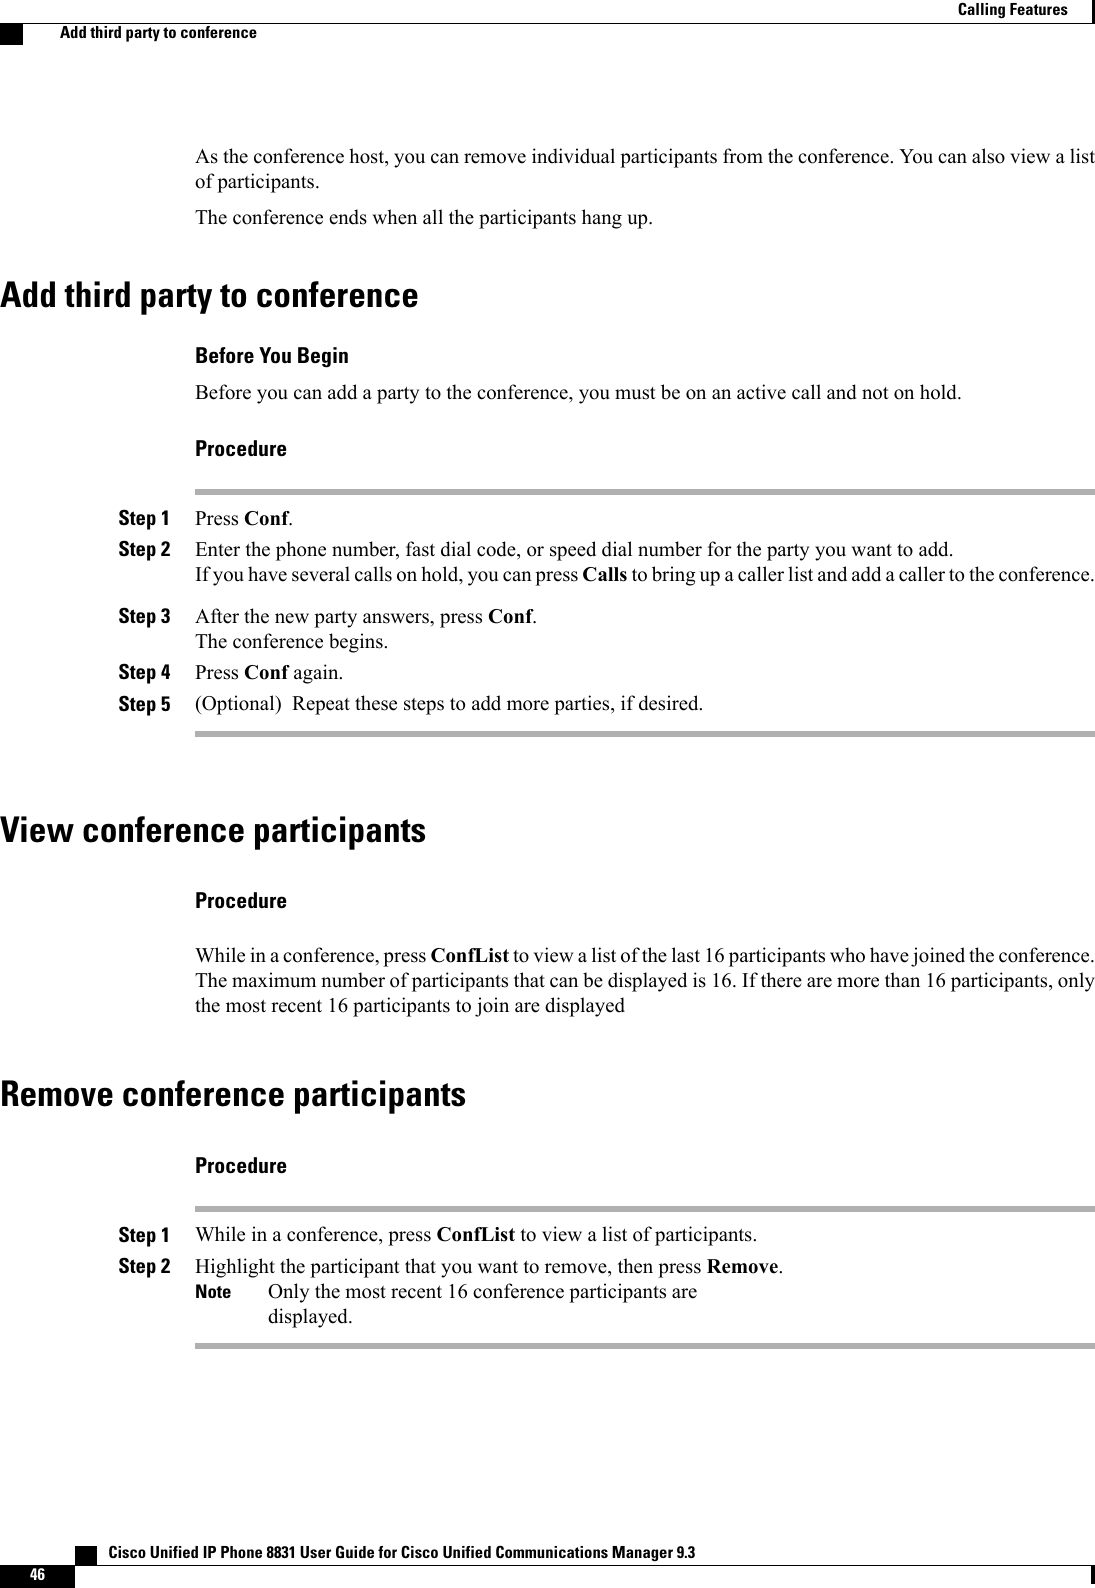 As the conference host, you can remove individual participants from the conference. You can also view a listof participants.The conference ends when all the participants hang up.Add third party to conferenceBefore You BeginBefore you can add a party to the conference, you must be on an active call and not on hold.ProcedureStep 1 Press Conf.Step 2 Enter the phone number, fast dial code, or speed dial number for the party you want to add.If you have several calls on hold, you can press Calls to bring up a caller list and add a caller to the conference.Step 3 After the new party answers, press Conf.The conference begins.Step 4 Press Conf again.Step 5 (Optional) Repeat these steps to add more parties, if desired.View conference participantsProcedureWhile in a conference, press ConfList to view a list of the last 16 participants who have joined the conference.The maximum number of participants that can be displayed is 16. If there are more than 16 participants, onlythe most recent 16 participants to join are displayedRemove conference participantsProcedureStep 1 While in a conference, press ConfList to view a list of participants.Step 2 Highlight the participant that you want to remove, then press Remove.Only the most recent 16 conference participants aredisplayed.Note   Cisco Unified IP Phone 8831 User Guide for Cisco Unified Communications Manager 9.346Calling FeaturesAdd third party to conference